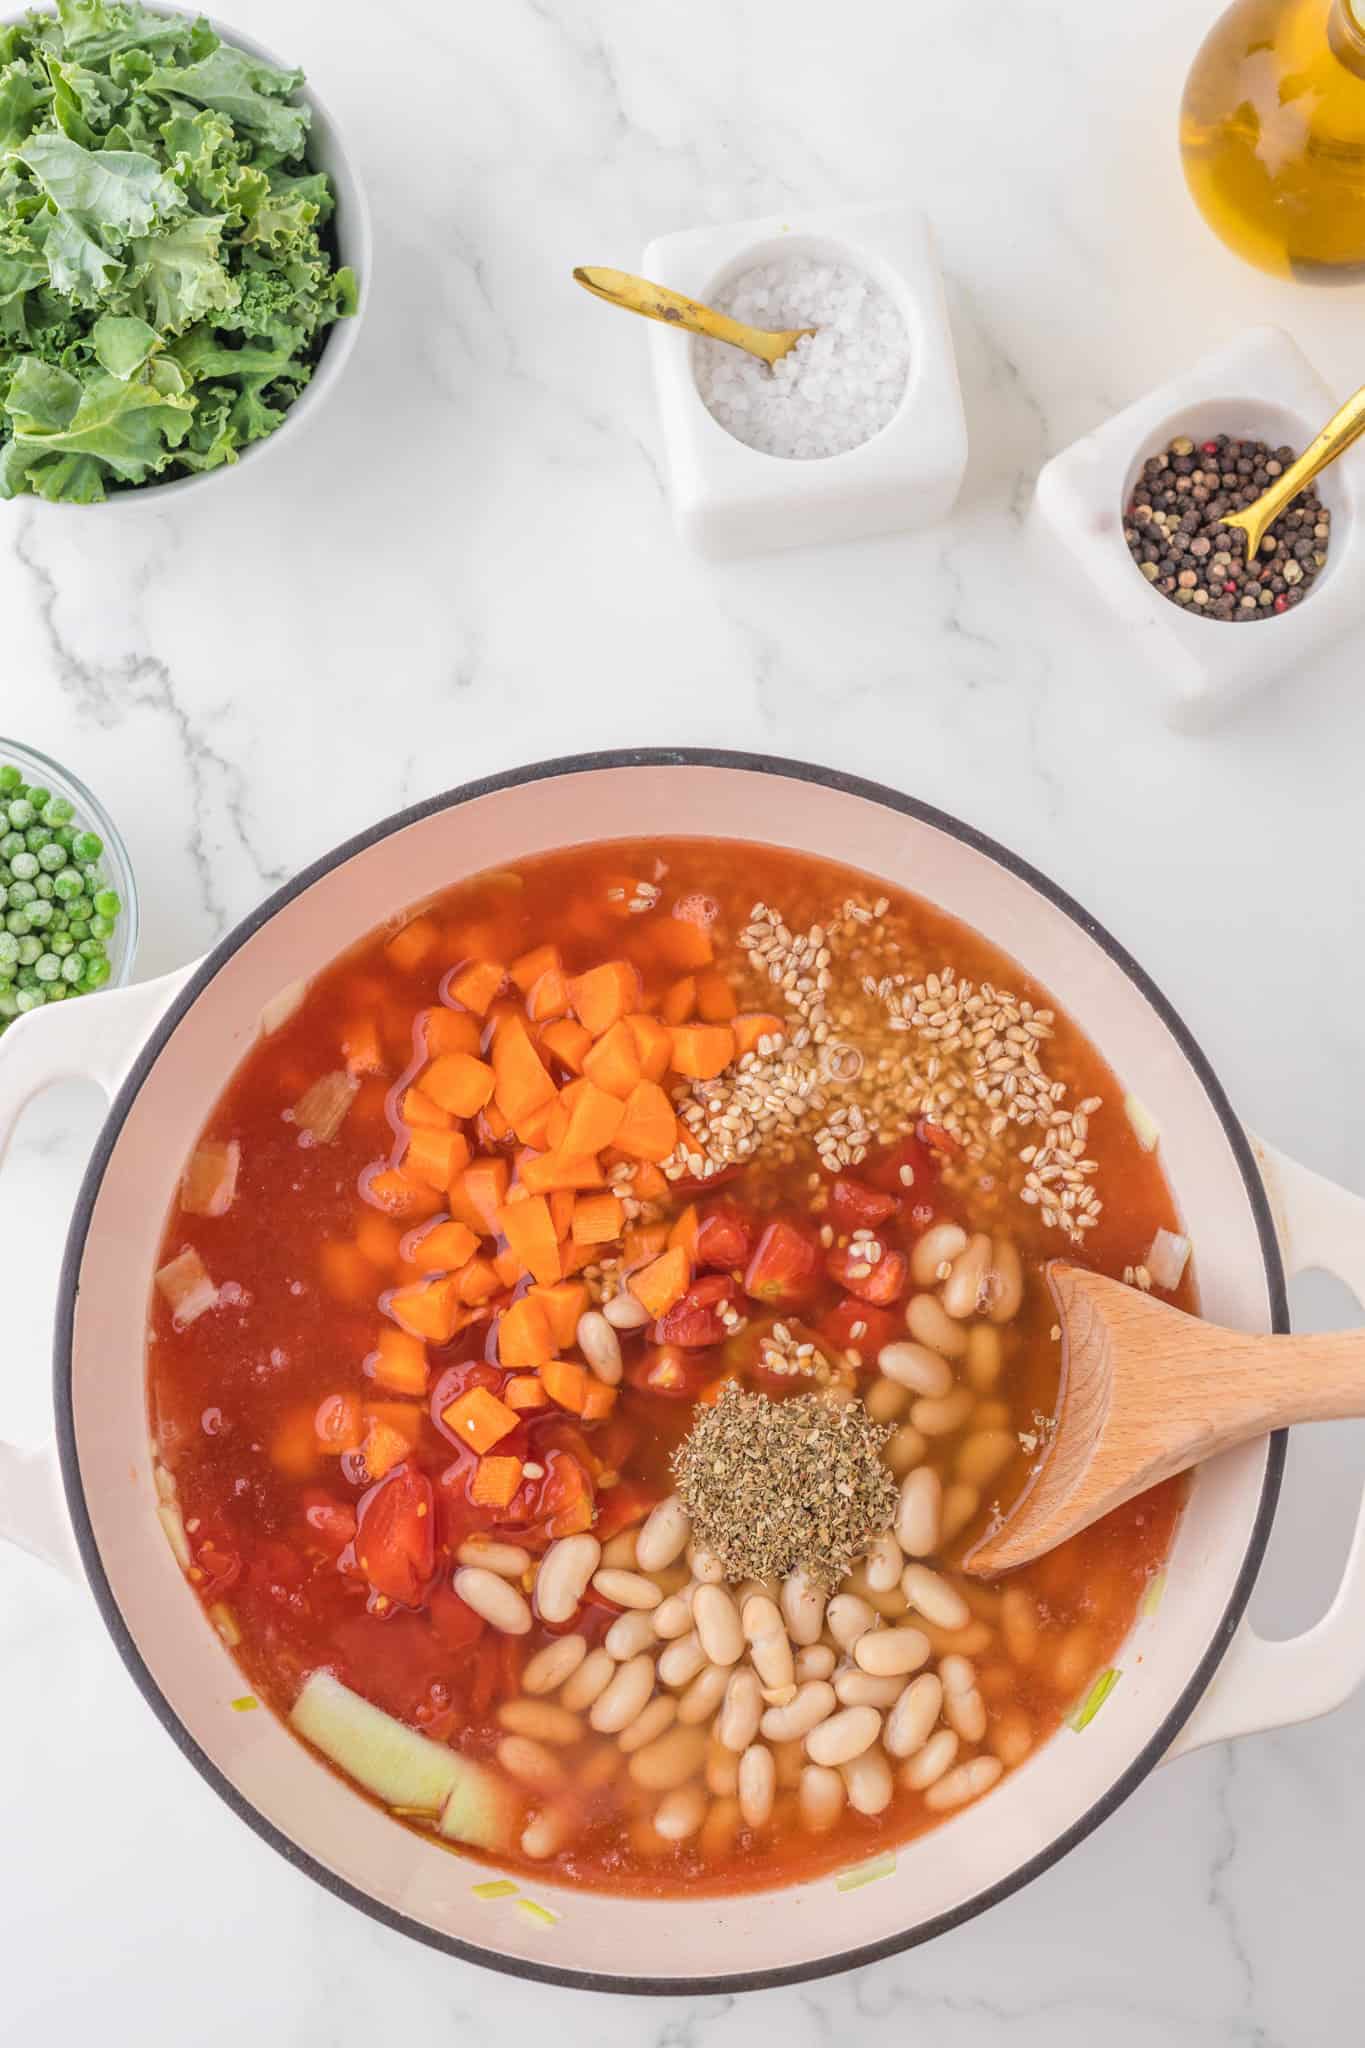 diced carrots, beans, diced tomatoes, barley, spices and vegetable broth added to soup pot.